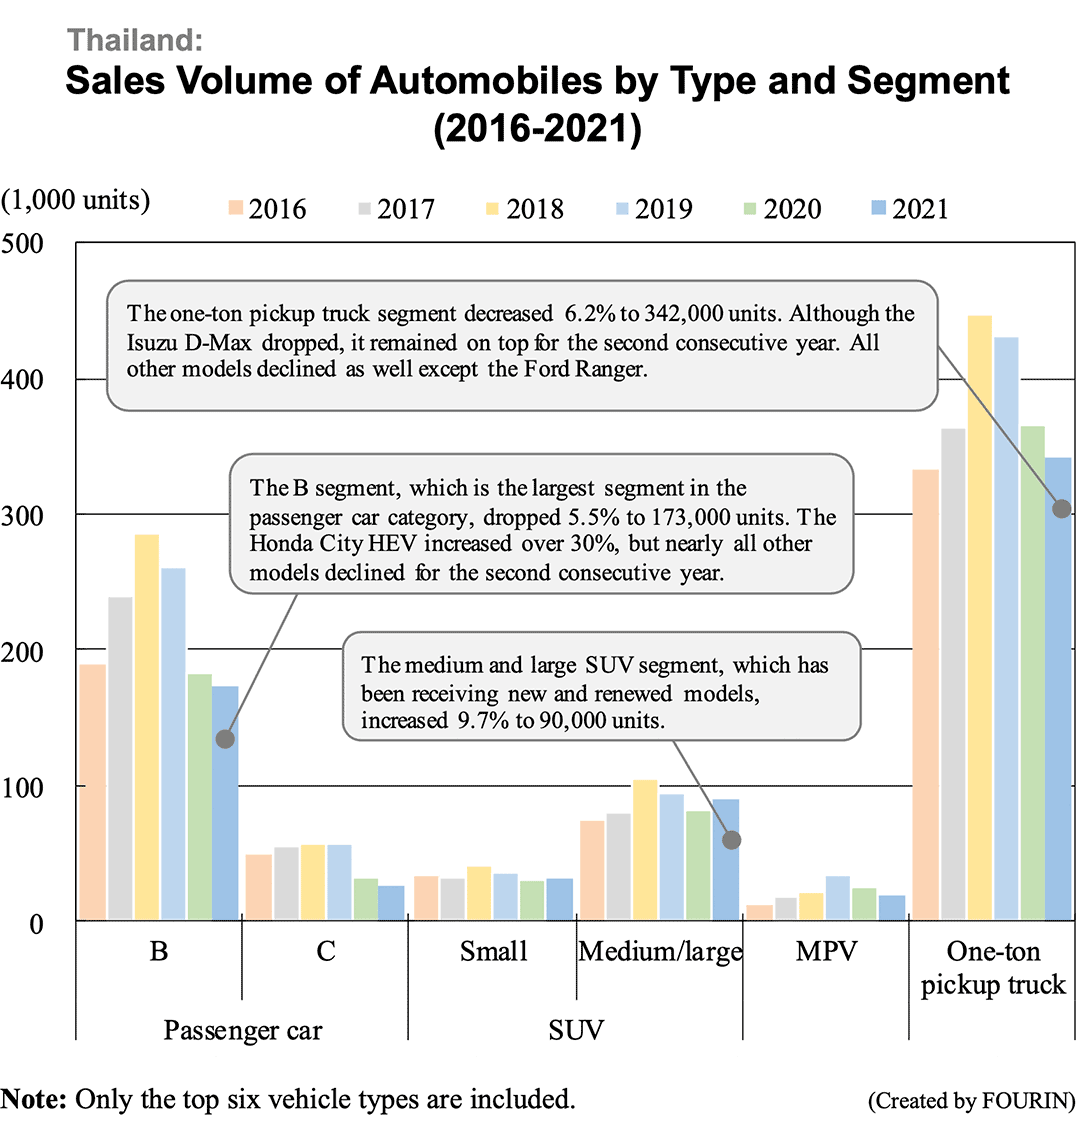 Bar graph: Thailand: Sales Volume of Automobiles by Type and Segment (2016-2021)